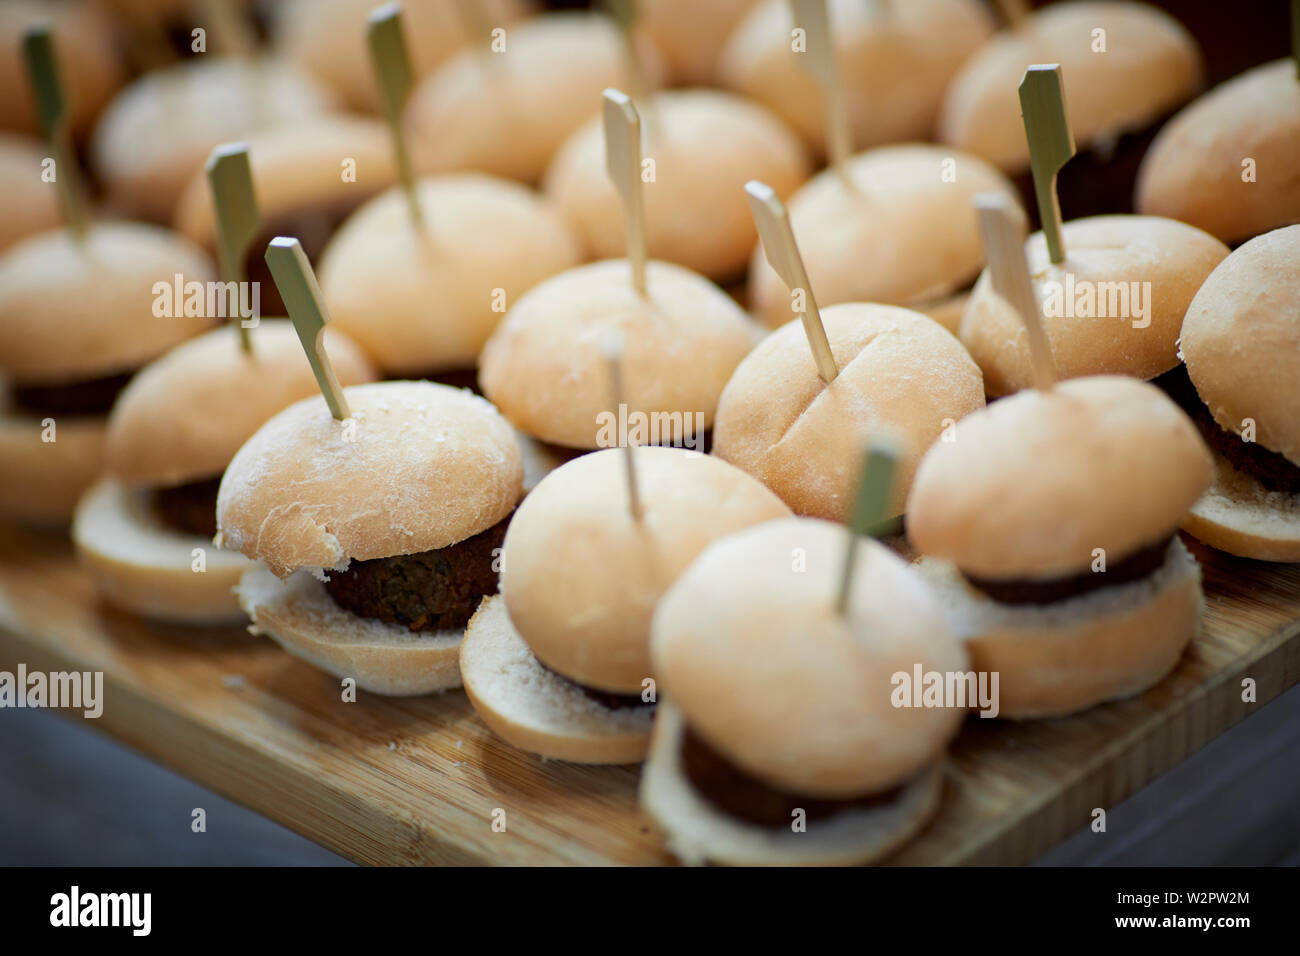 Small slider burgers in buns party food Stock Photo